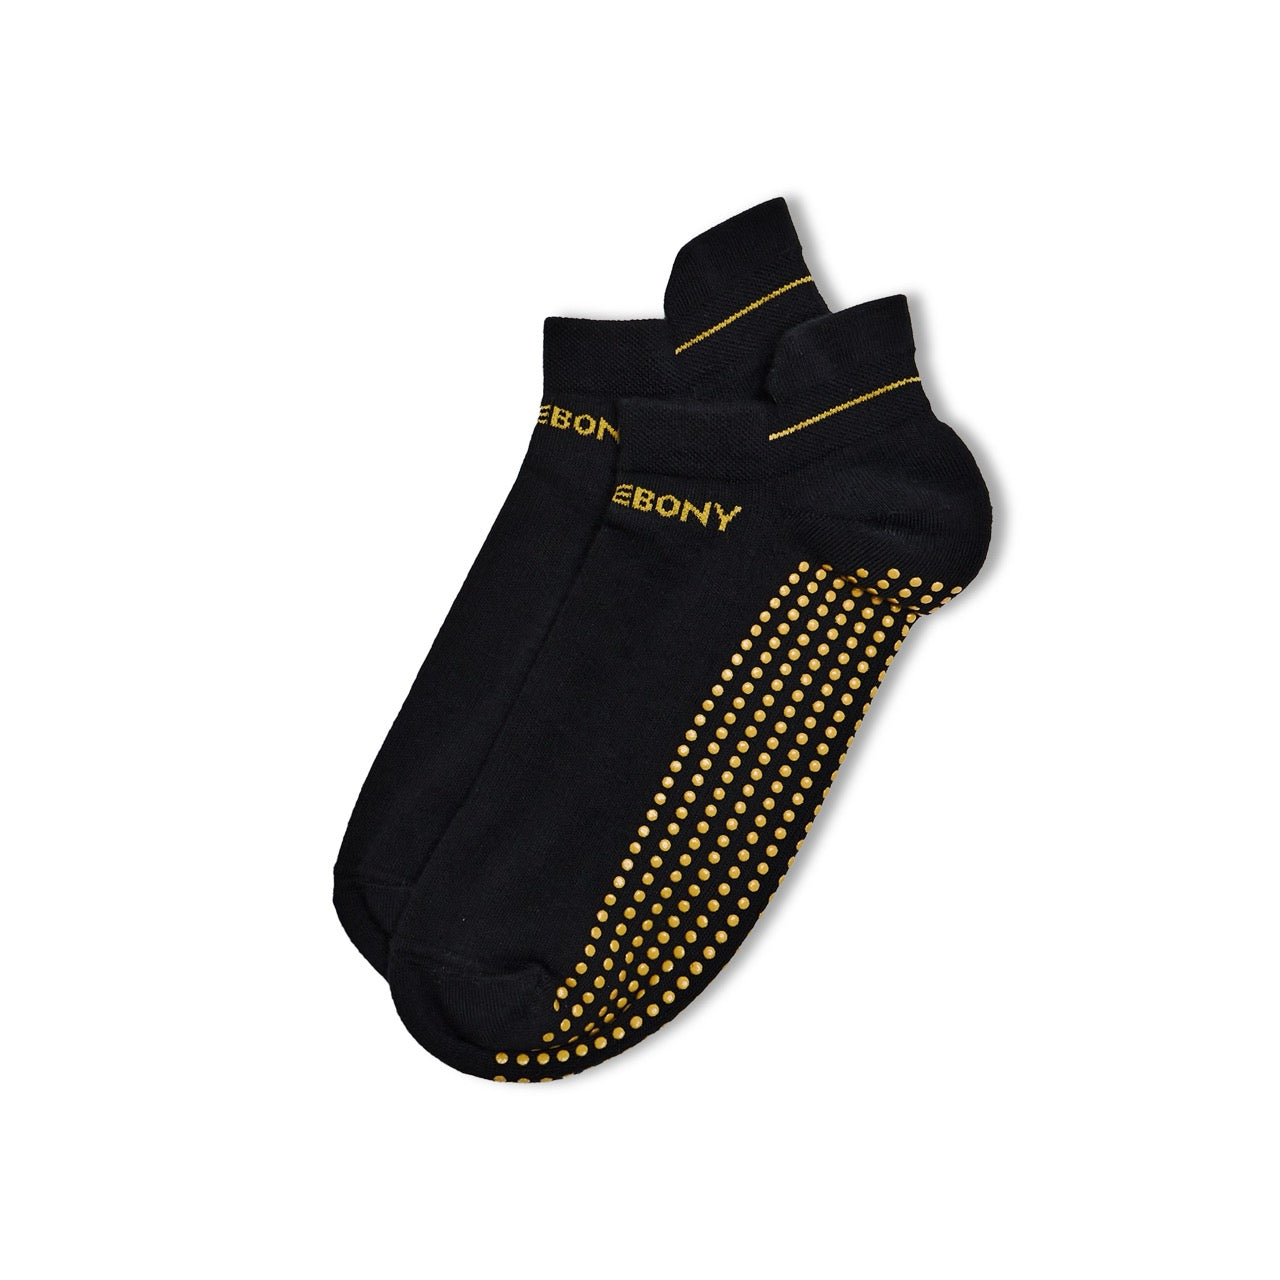 For Every Foot, Every Style: Ivory & Ebony Unisex Anti-Slip Ankle Socks - Extra-Long Staple Cotton, Cushioned Footbed, Blister Tab, Seamless Toe - Your Comfort, Our Commitment!